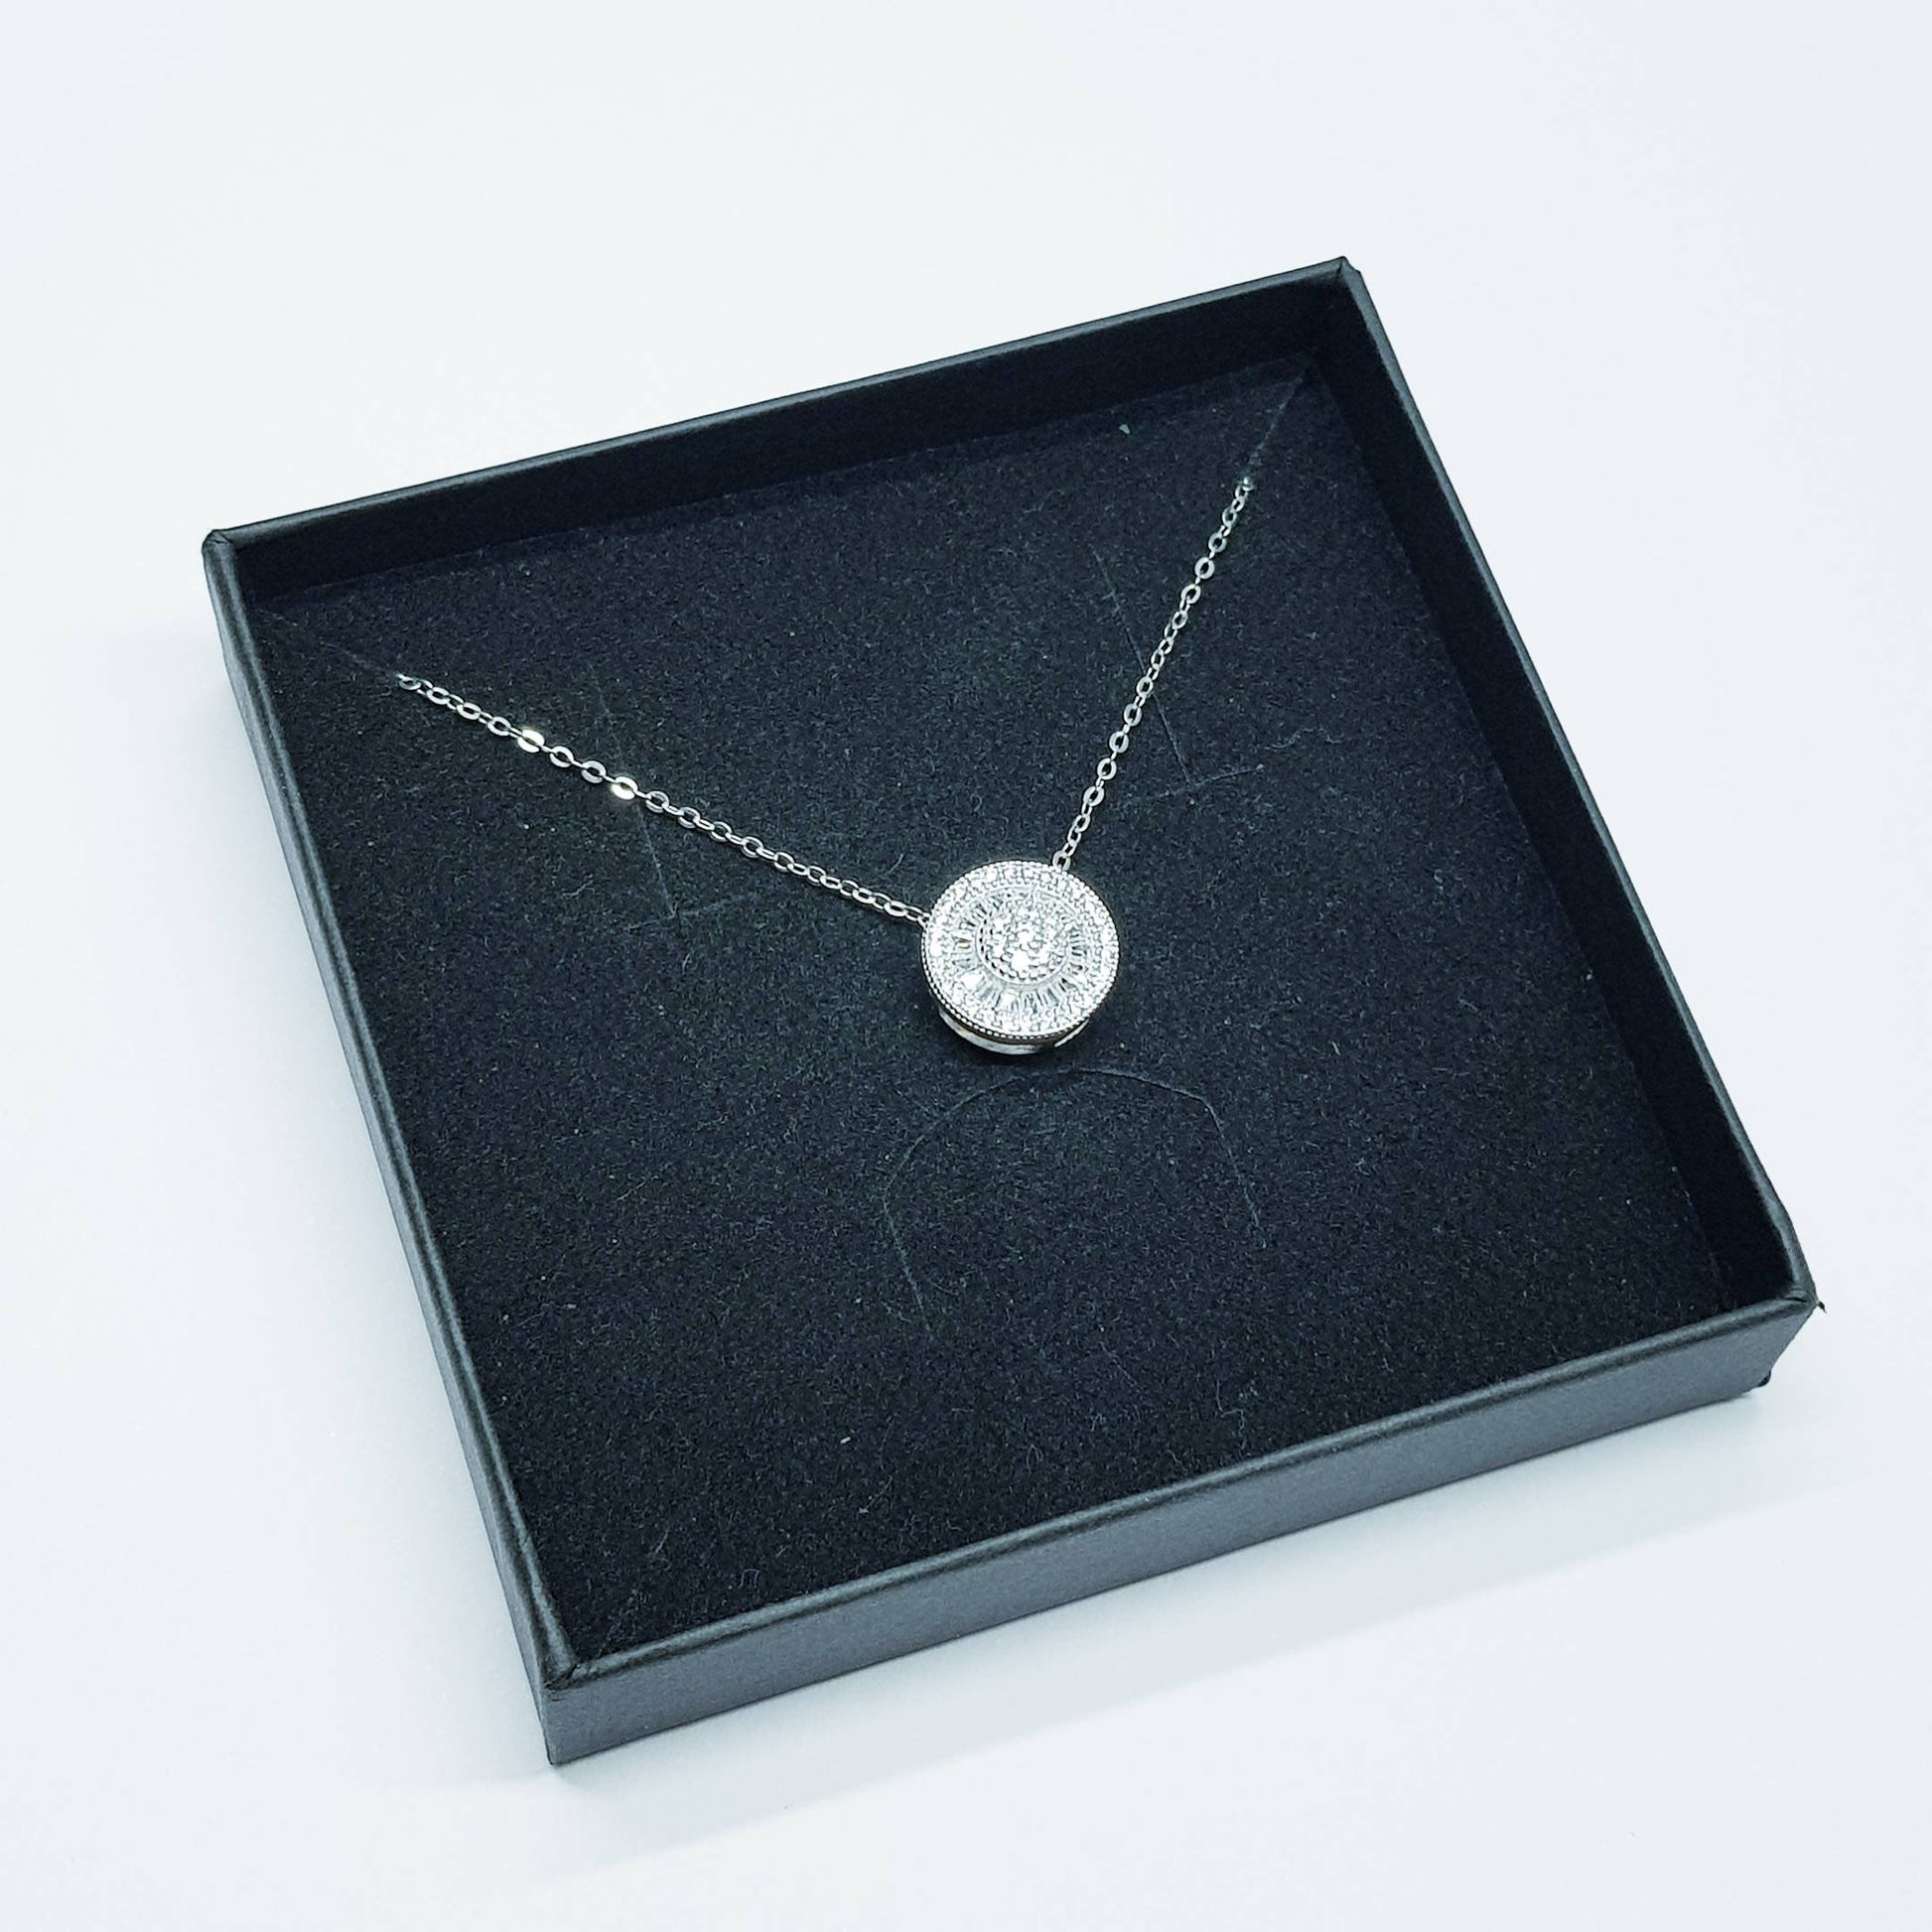 Vintage style round necklace floating on sterling silver chain